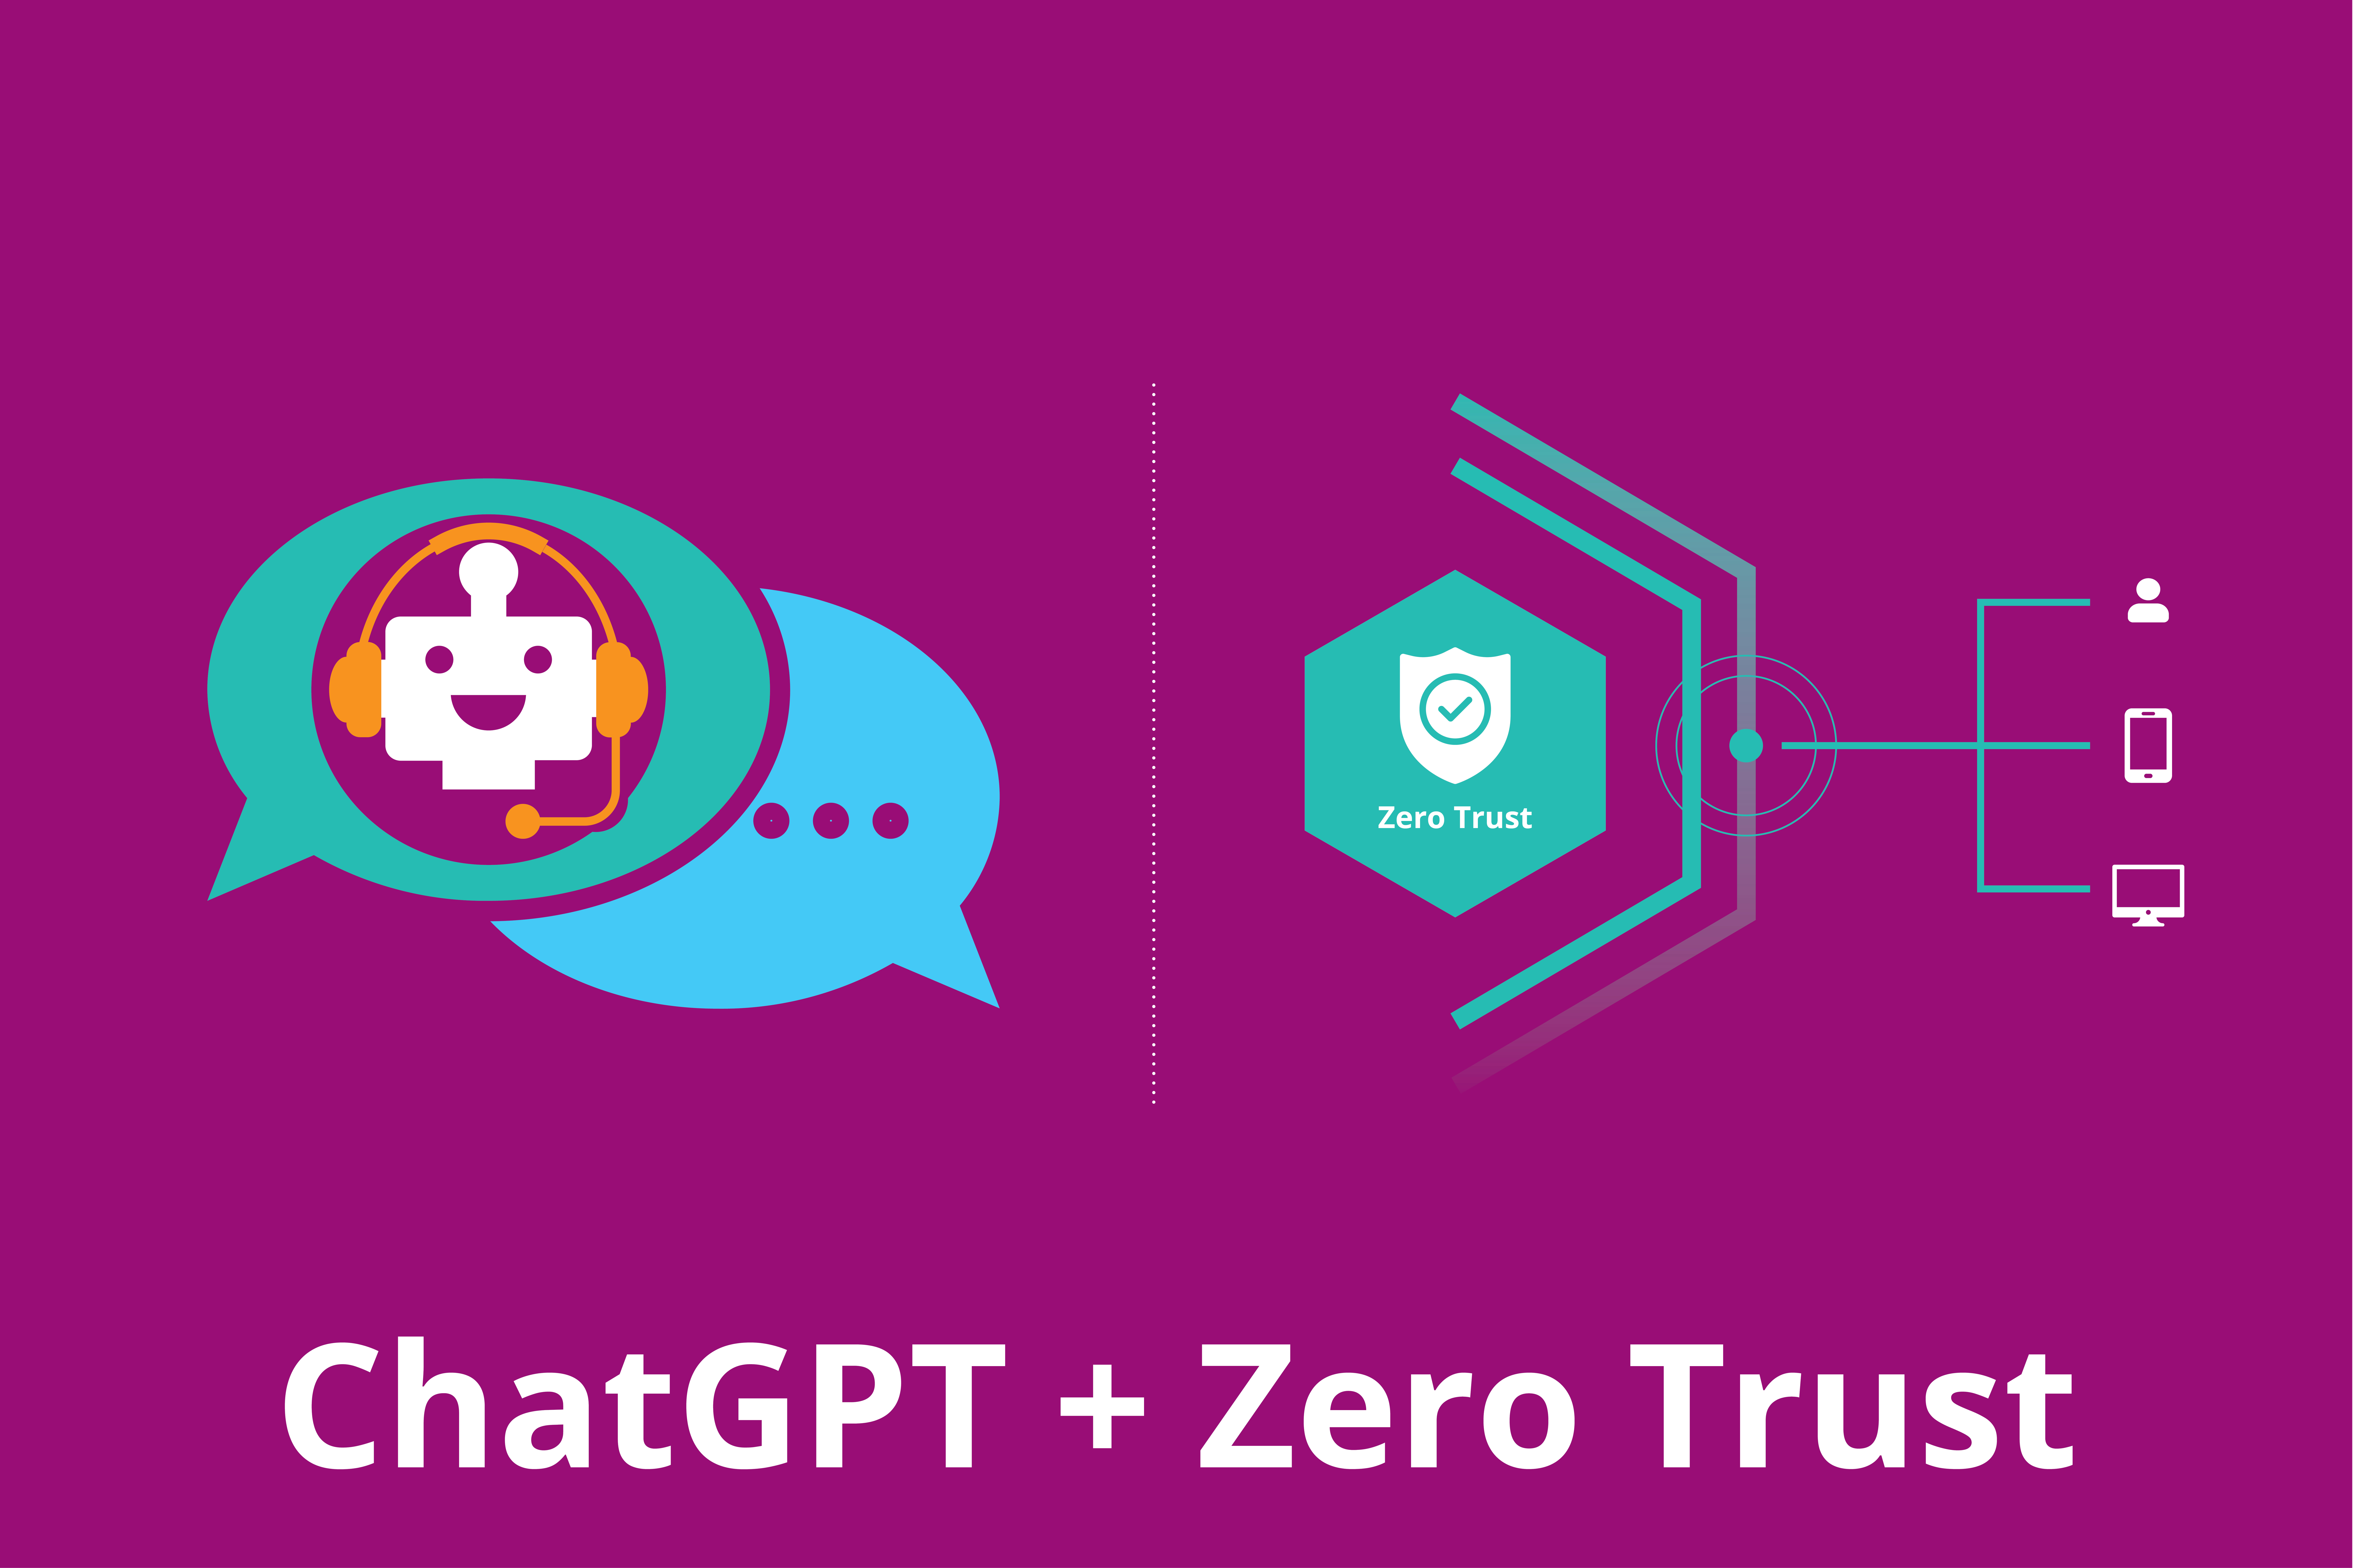 ChatGPT and Zero Trust – what’s behind the buzzwords?